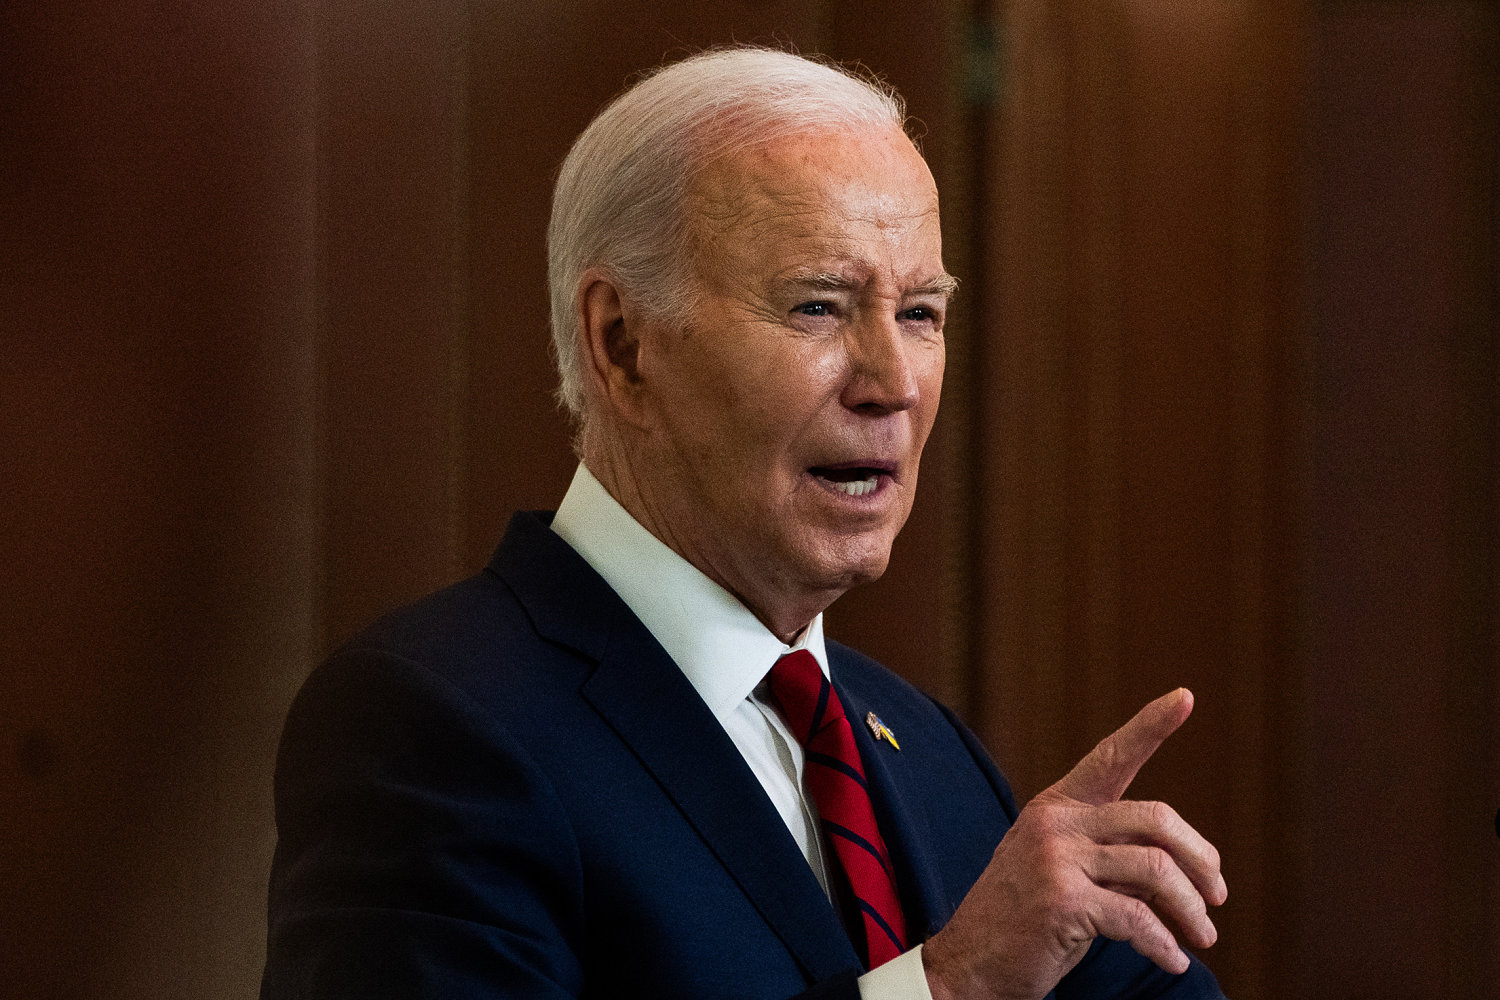 Biden campaign goes after Trump on health care in $14 million ad boost